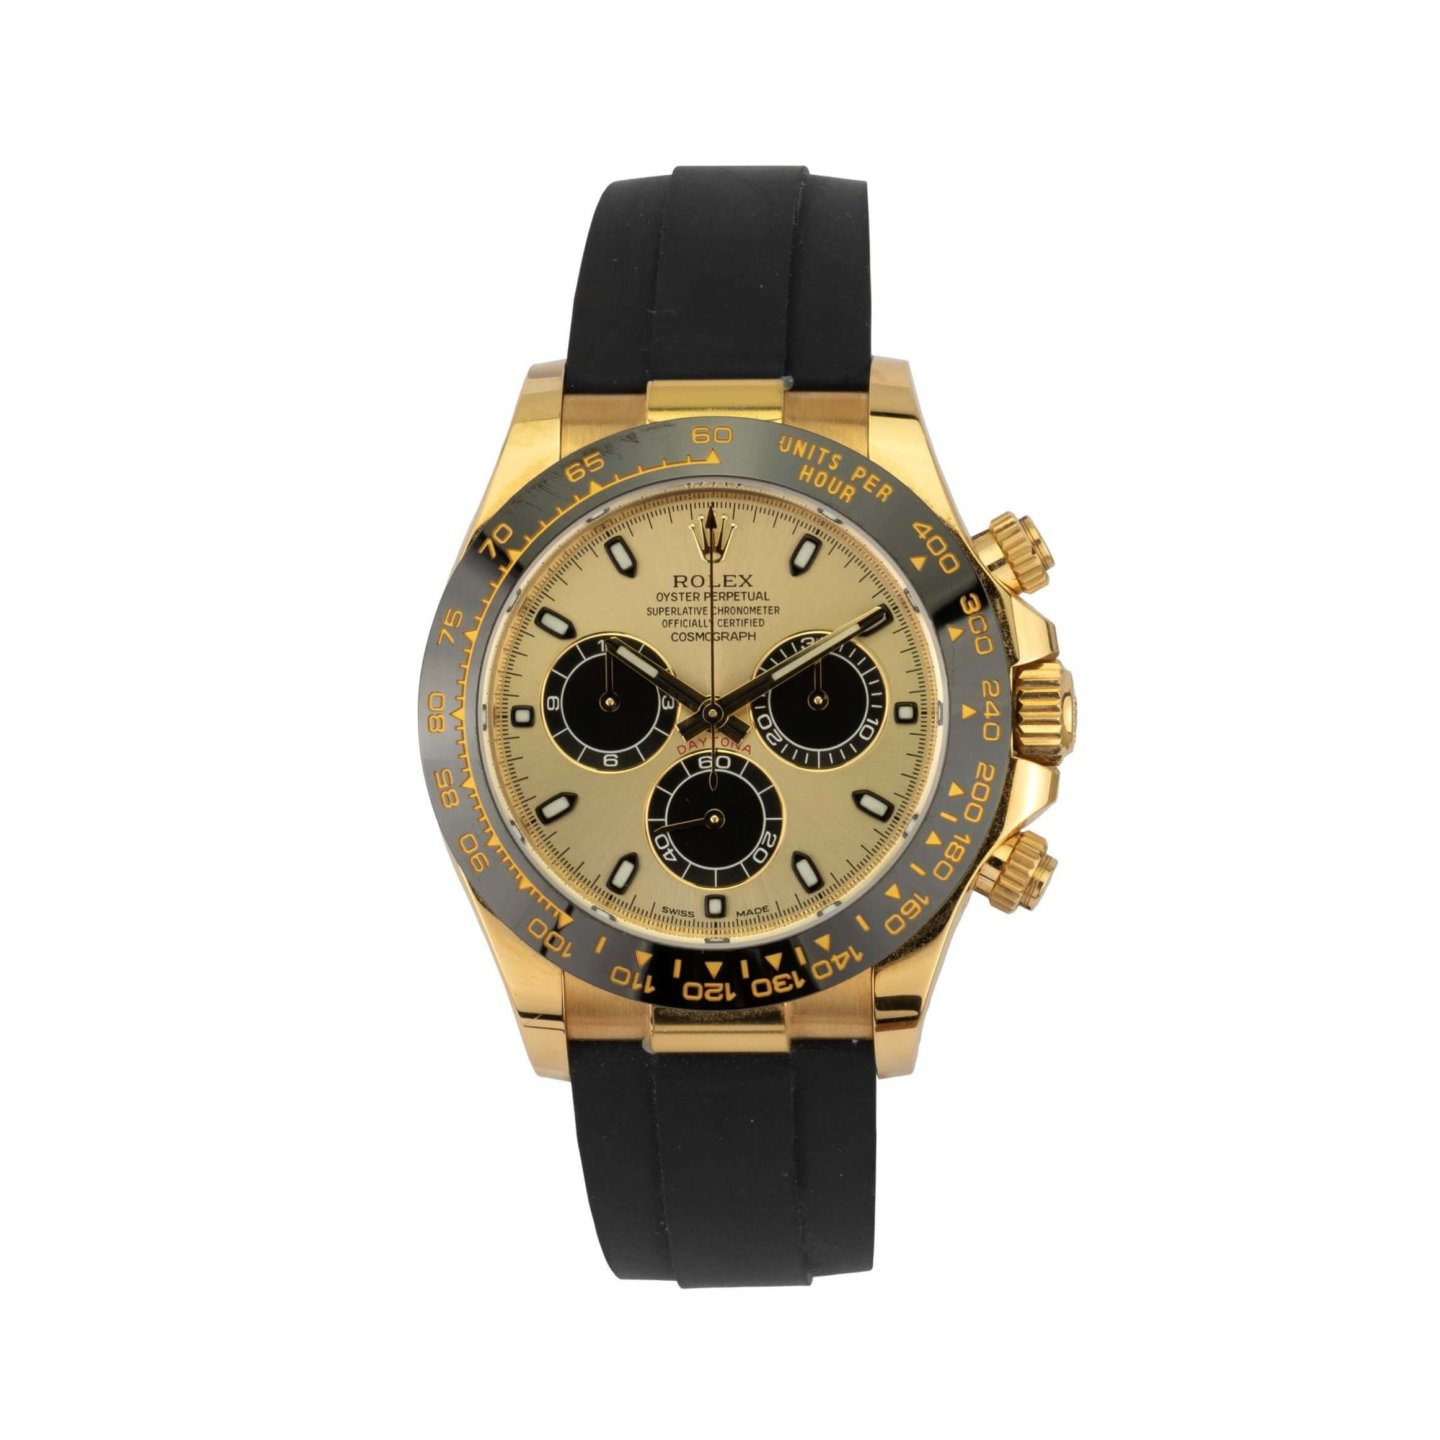 Pre-owned Rolex Oyster Perpetual Cosmograph Daytona Watch | Jeweller in ...